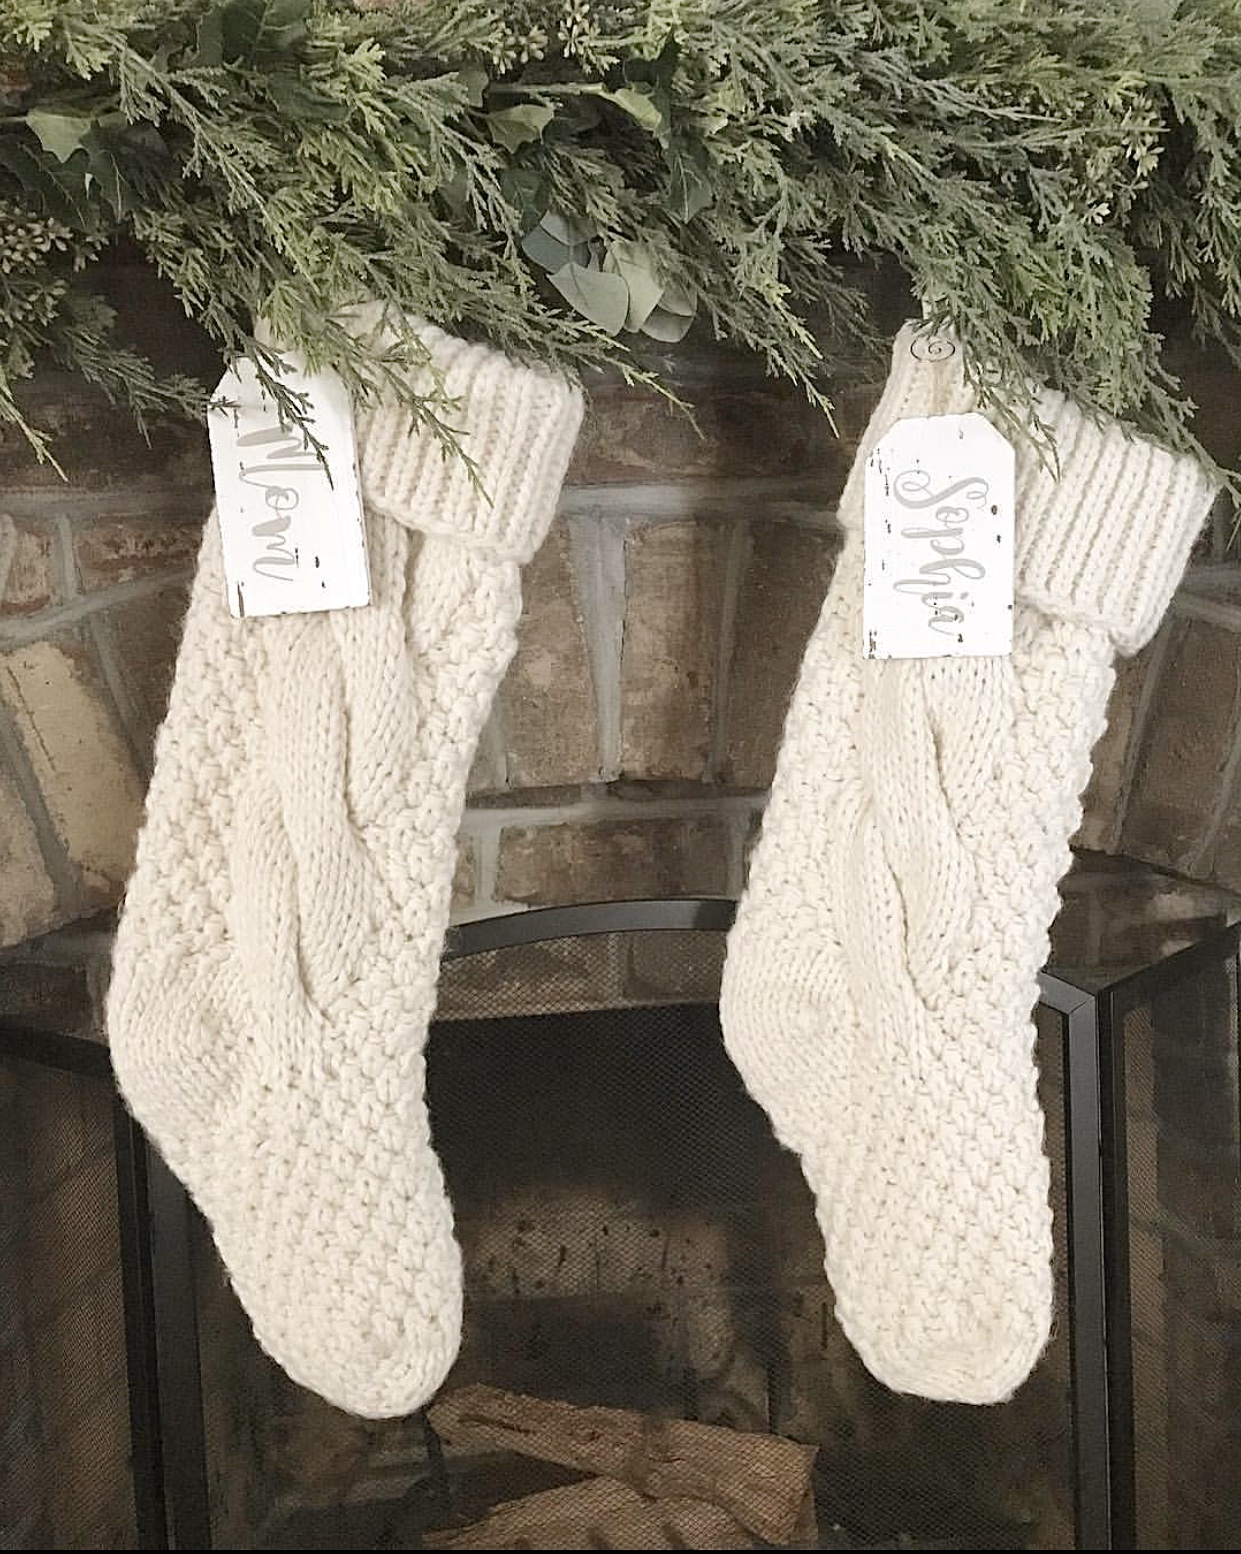 White knit stockings hung in front of a brick fireplace with garland. 